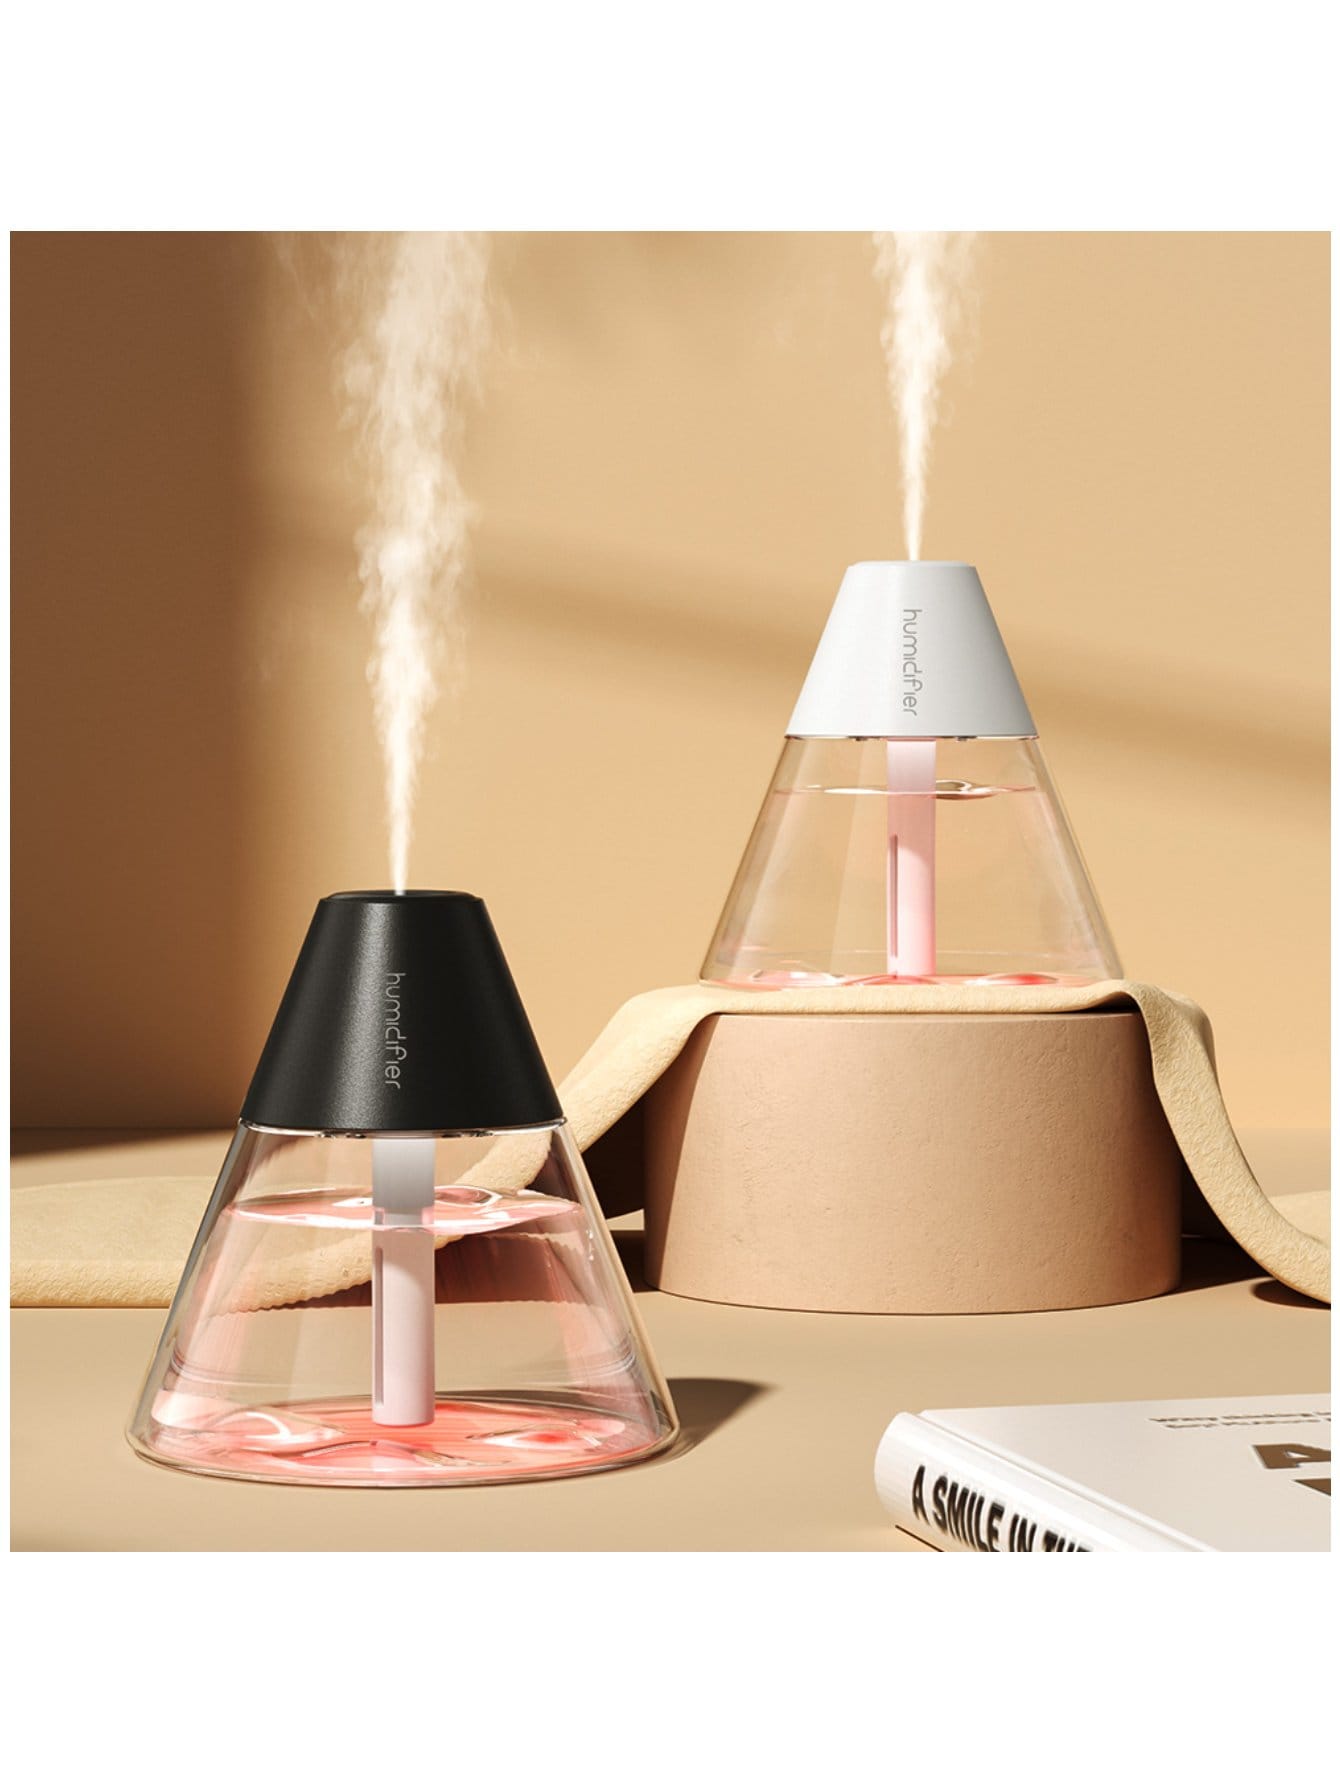 1pc Mini Volcano Shaped Humidifier With Auto Power Off And Dual Spray Modes, Suitable For Bedroom, Living Room And Office Desktop-Black-2